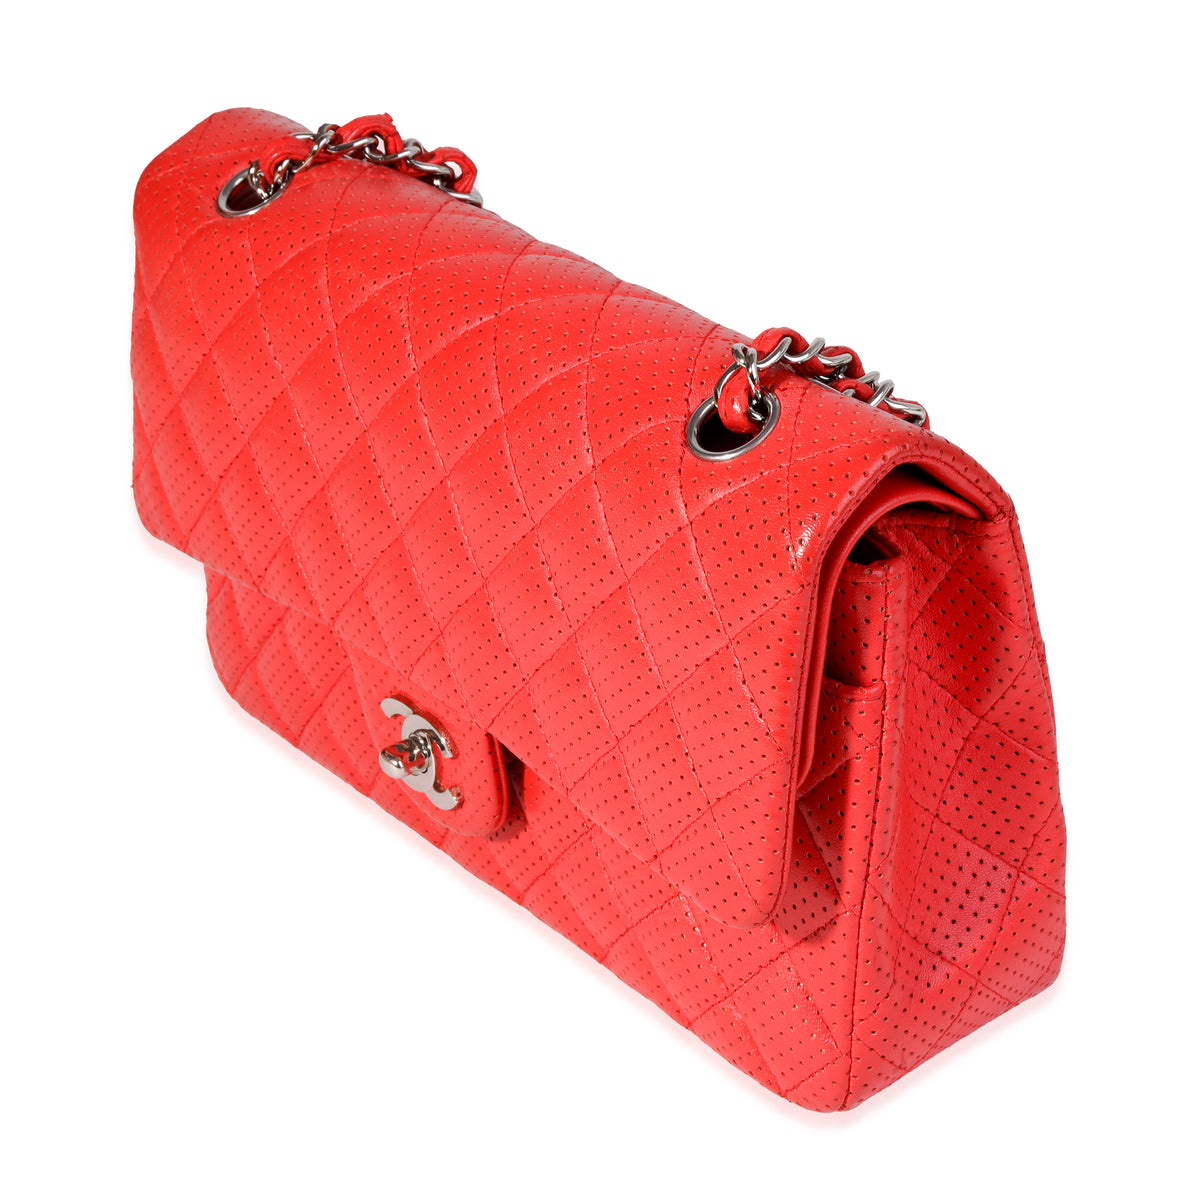 Chanel Red Perforated Leather Medium Classic Double Flap Bag